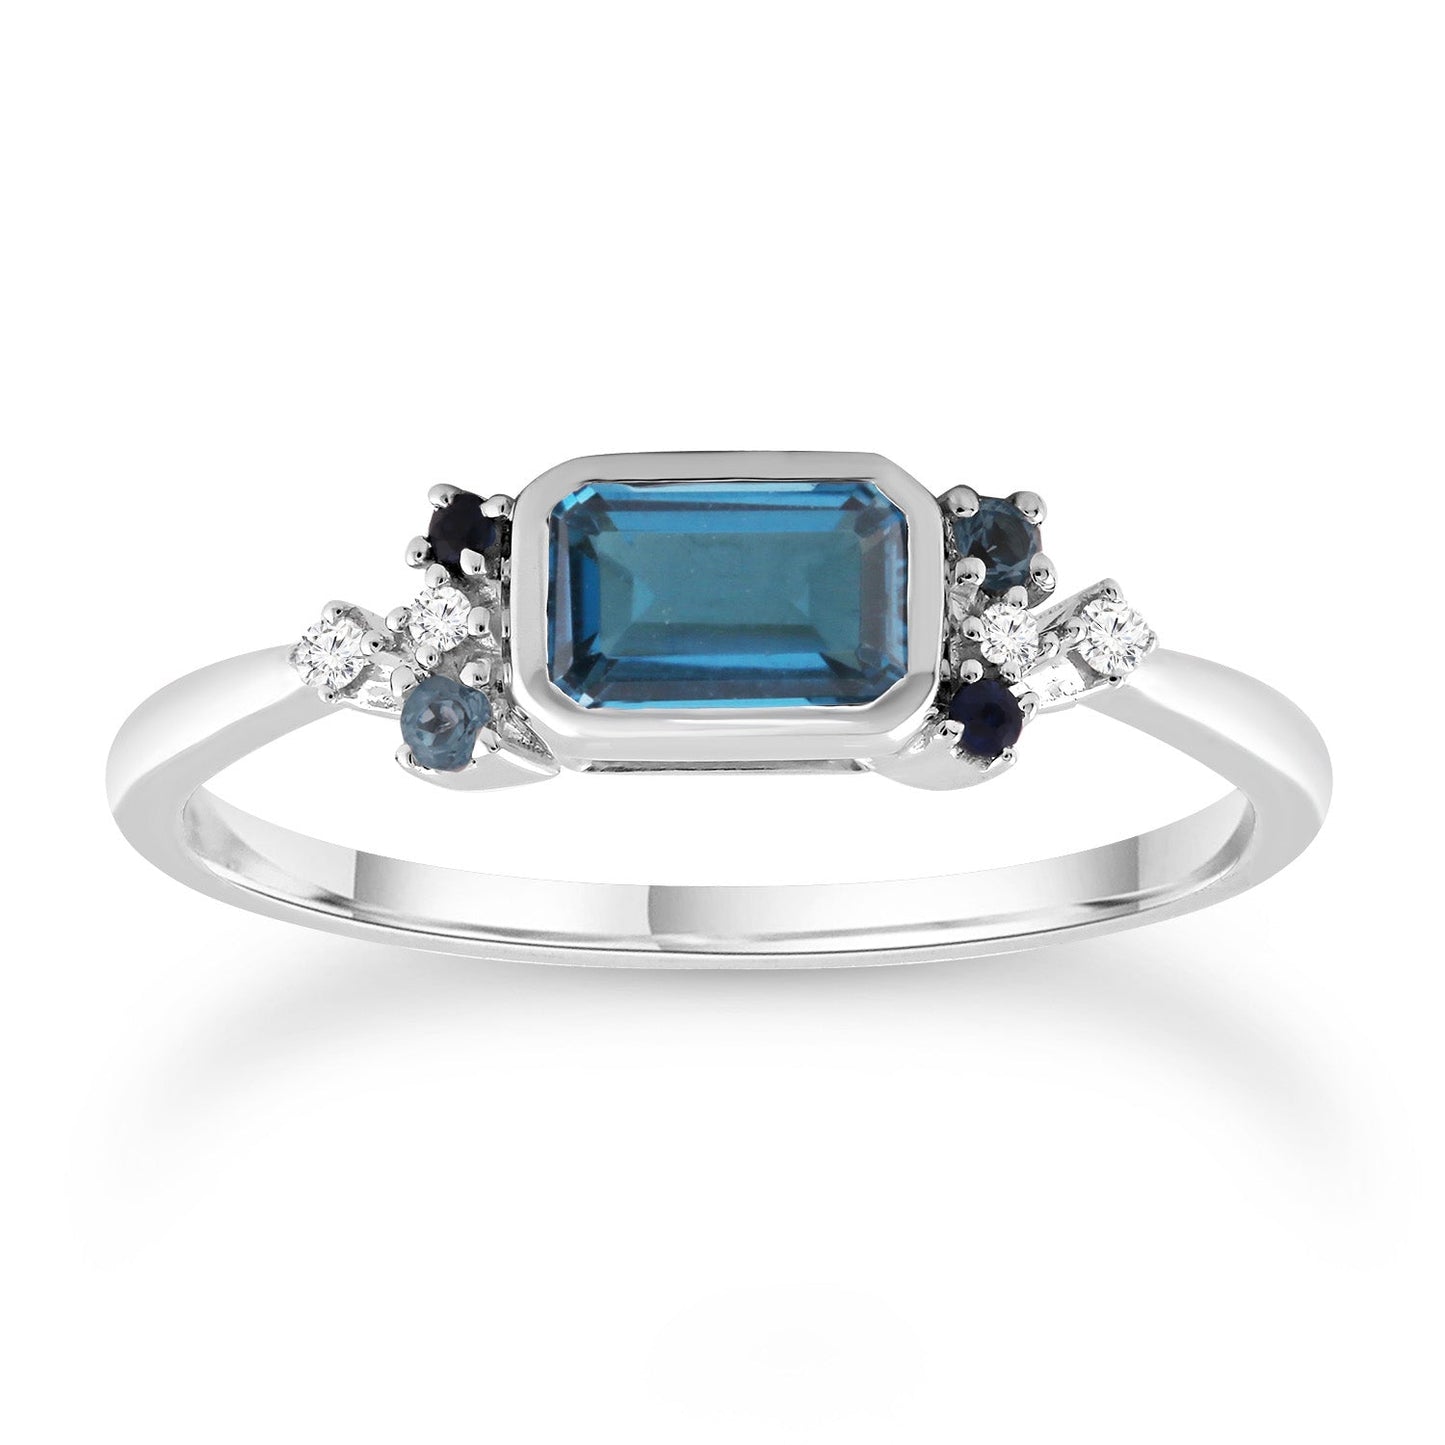 Diamond and Blue Topaz Ring with 0.05ct Diamonds in 9K White Gold